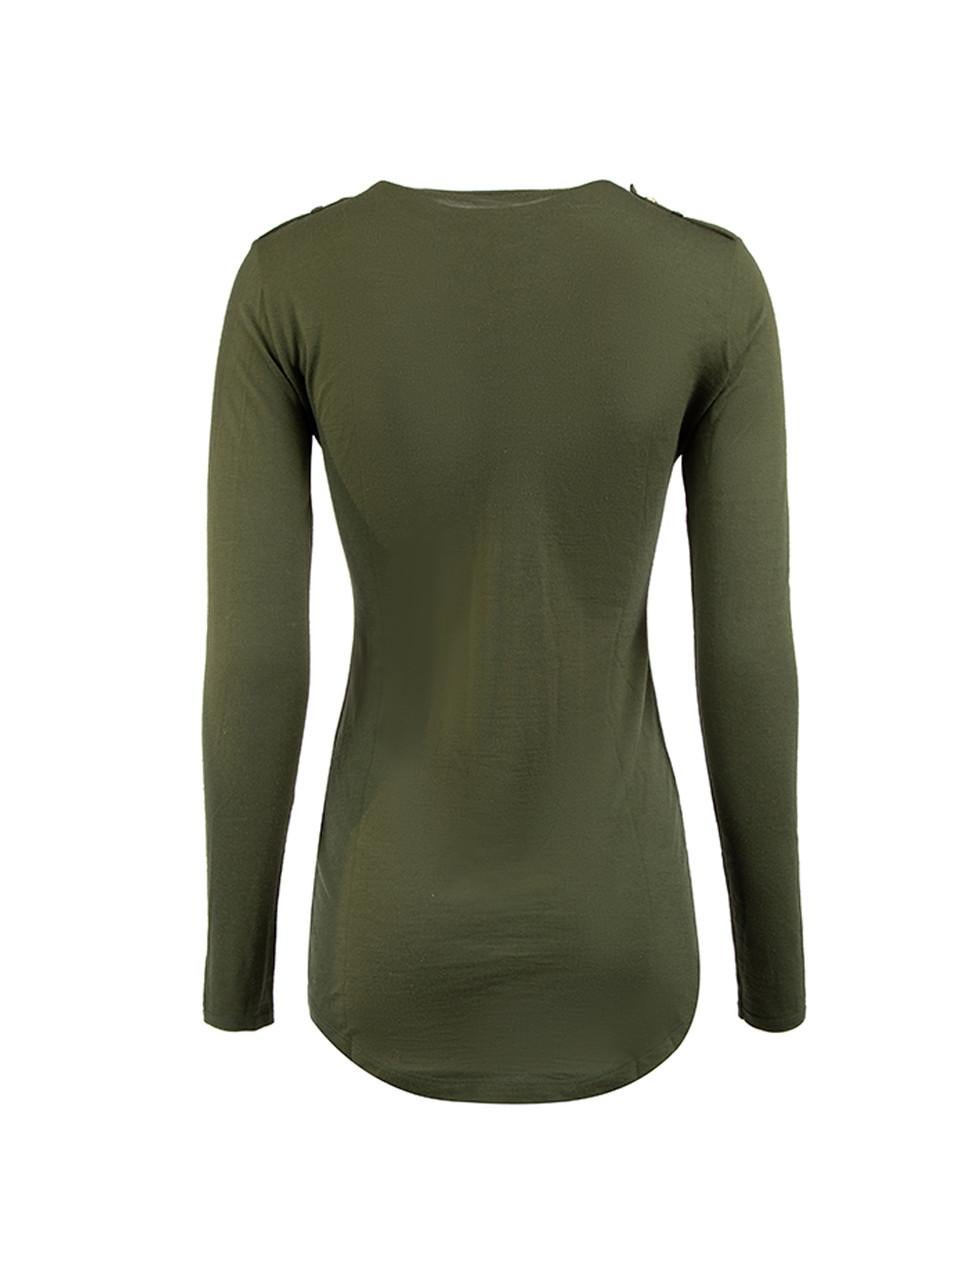 Balmain Khaki Wool Buttoned Military Top Size S In Excellent Condition In London, GB